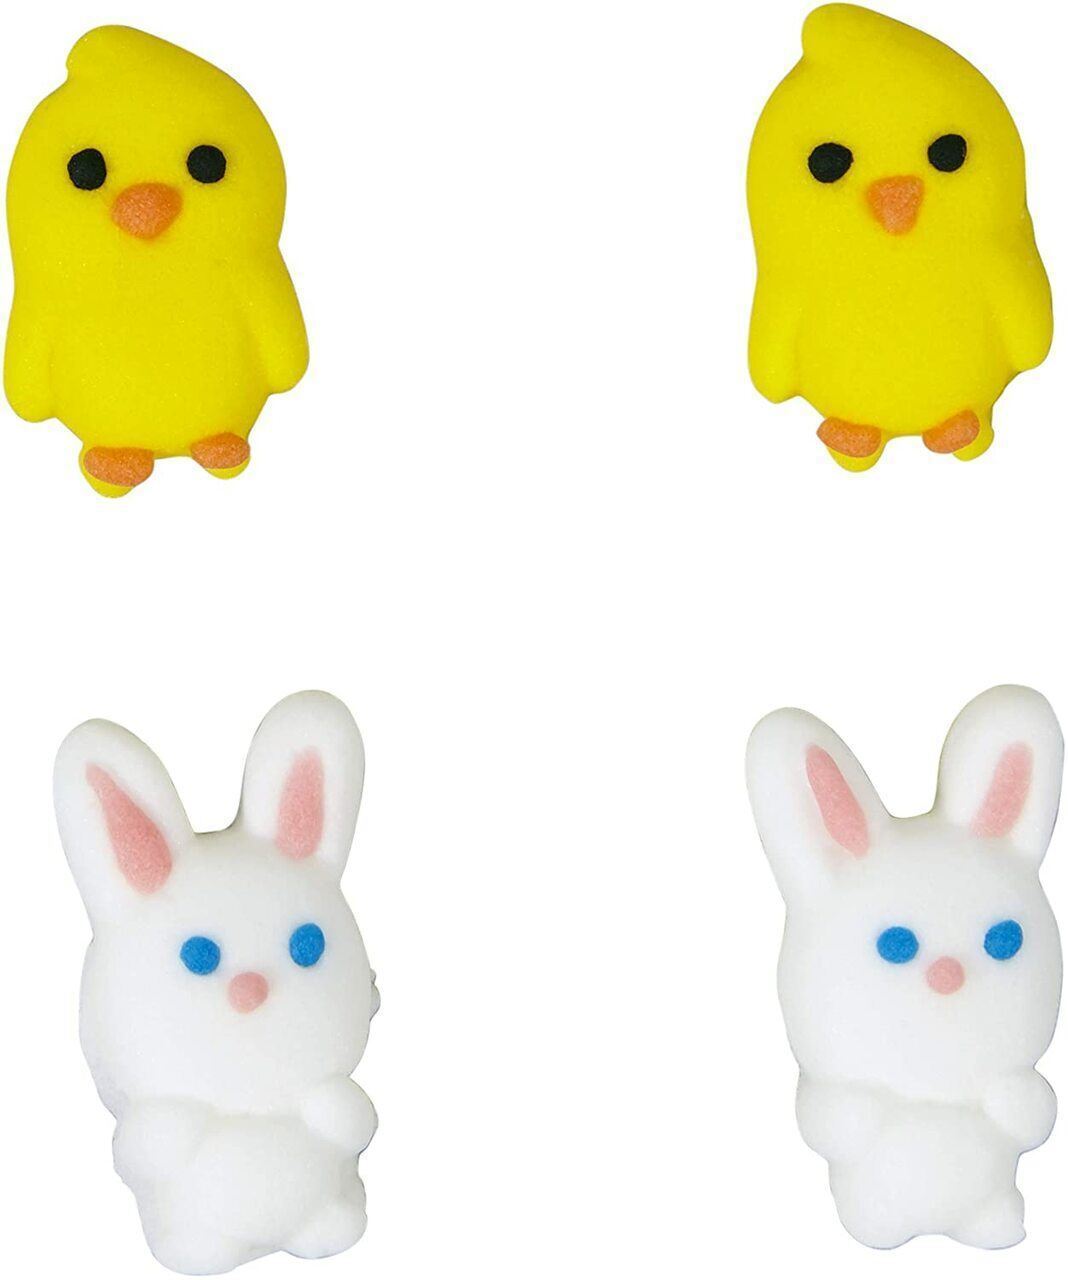 Primary image for Easter Bunny and Chick Royal Icing Decorations 24 Ct Wilton